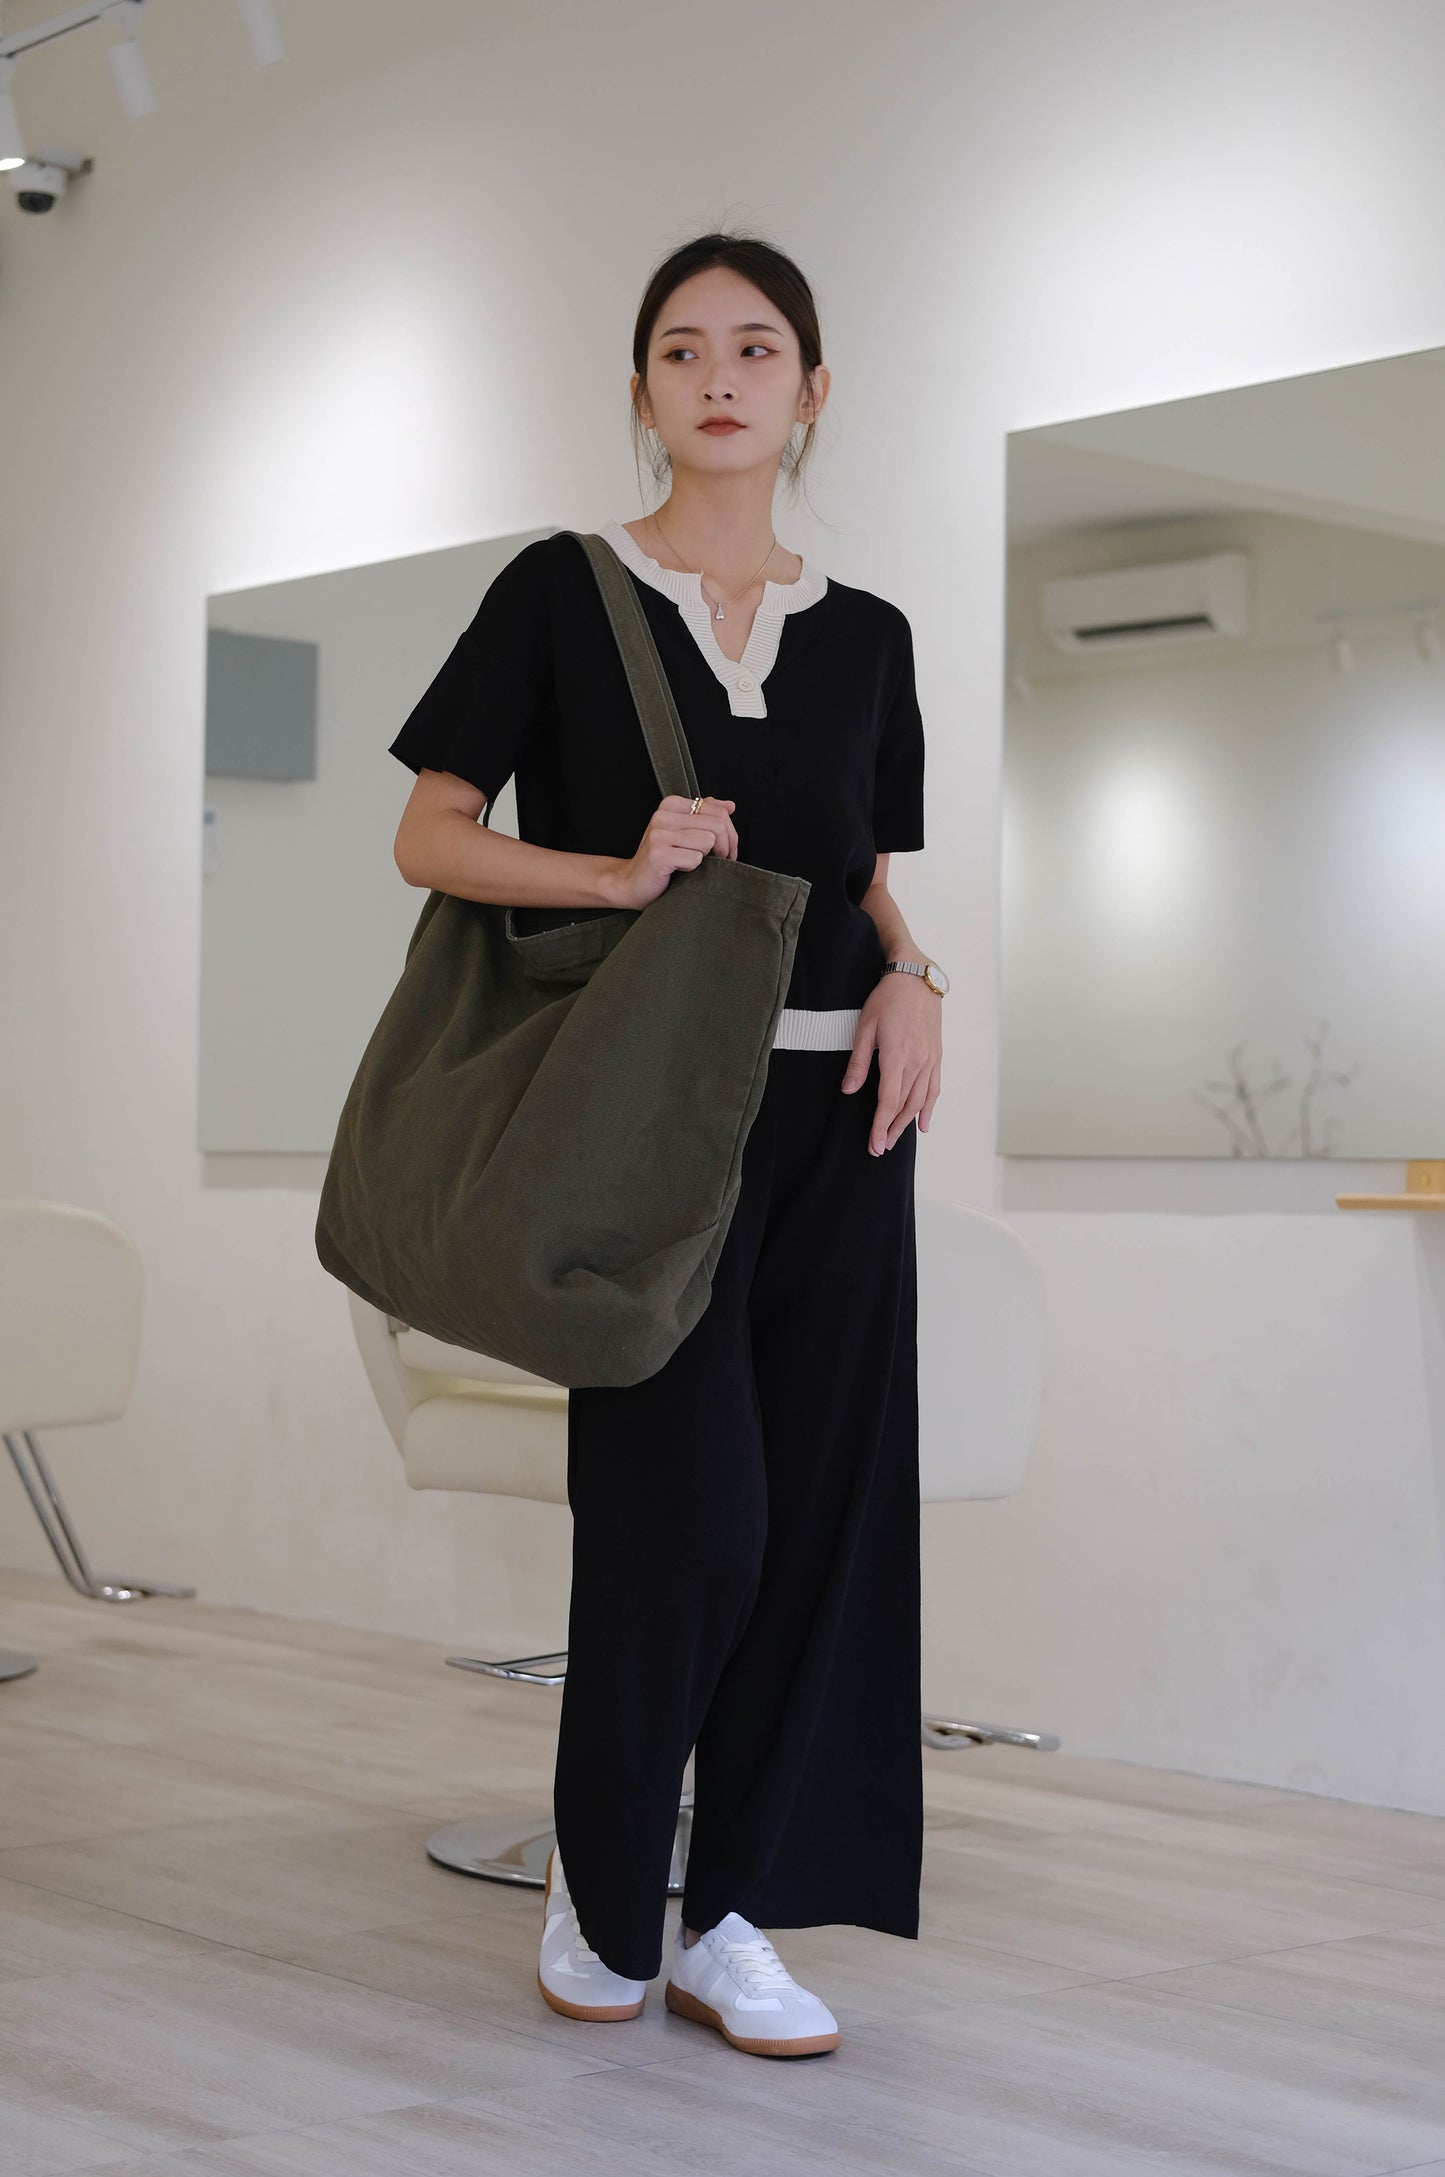 V short-sleeved sweater + high-waist wide-leg pants suit in classic black